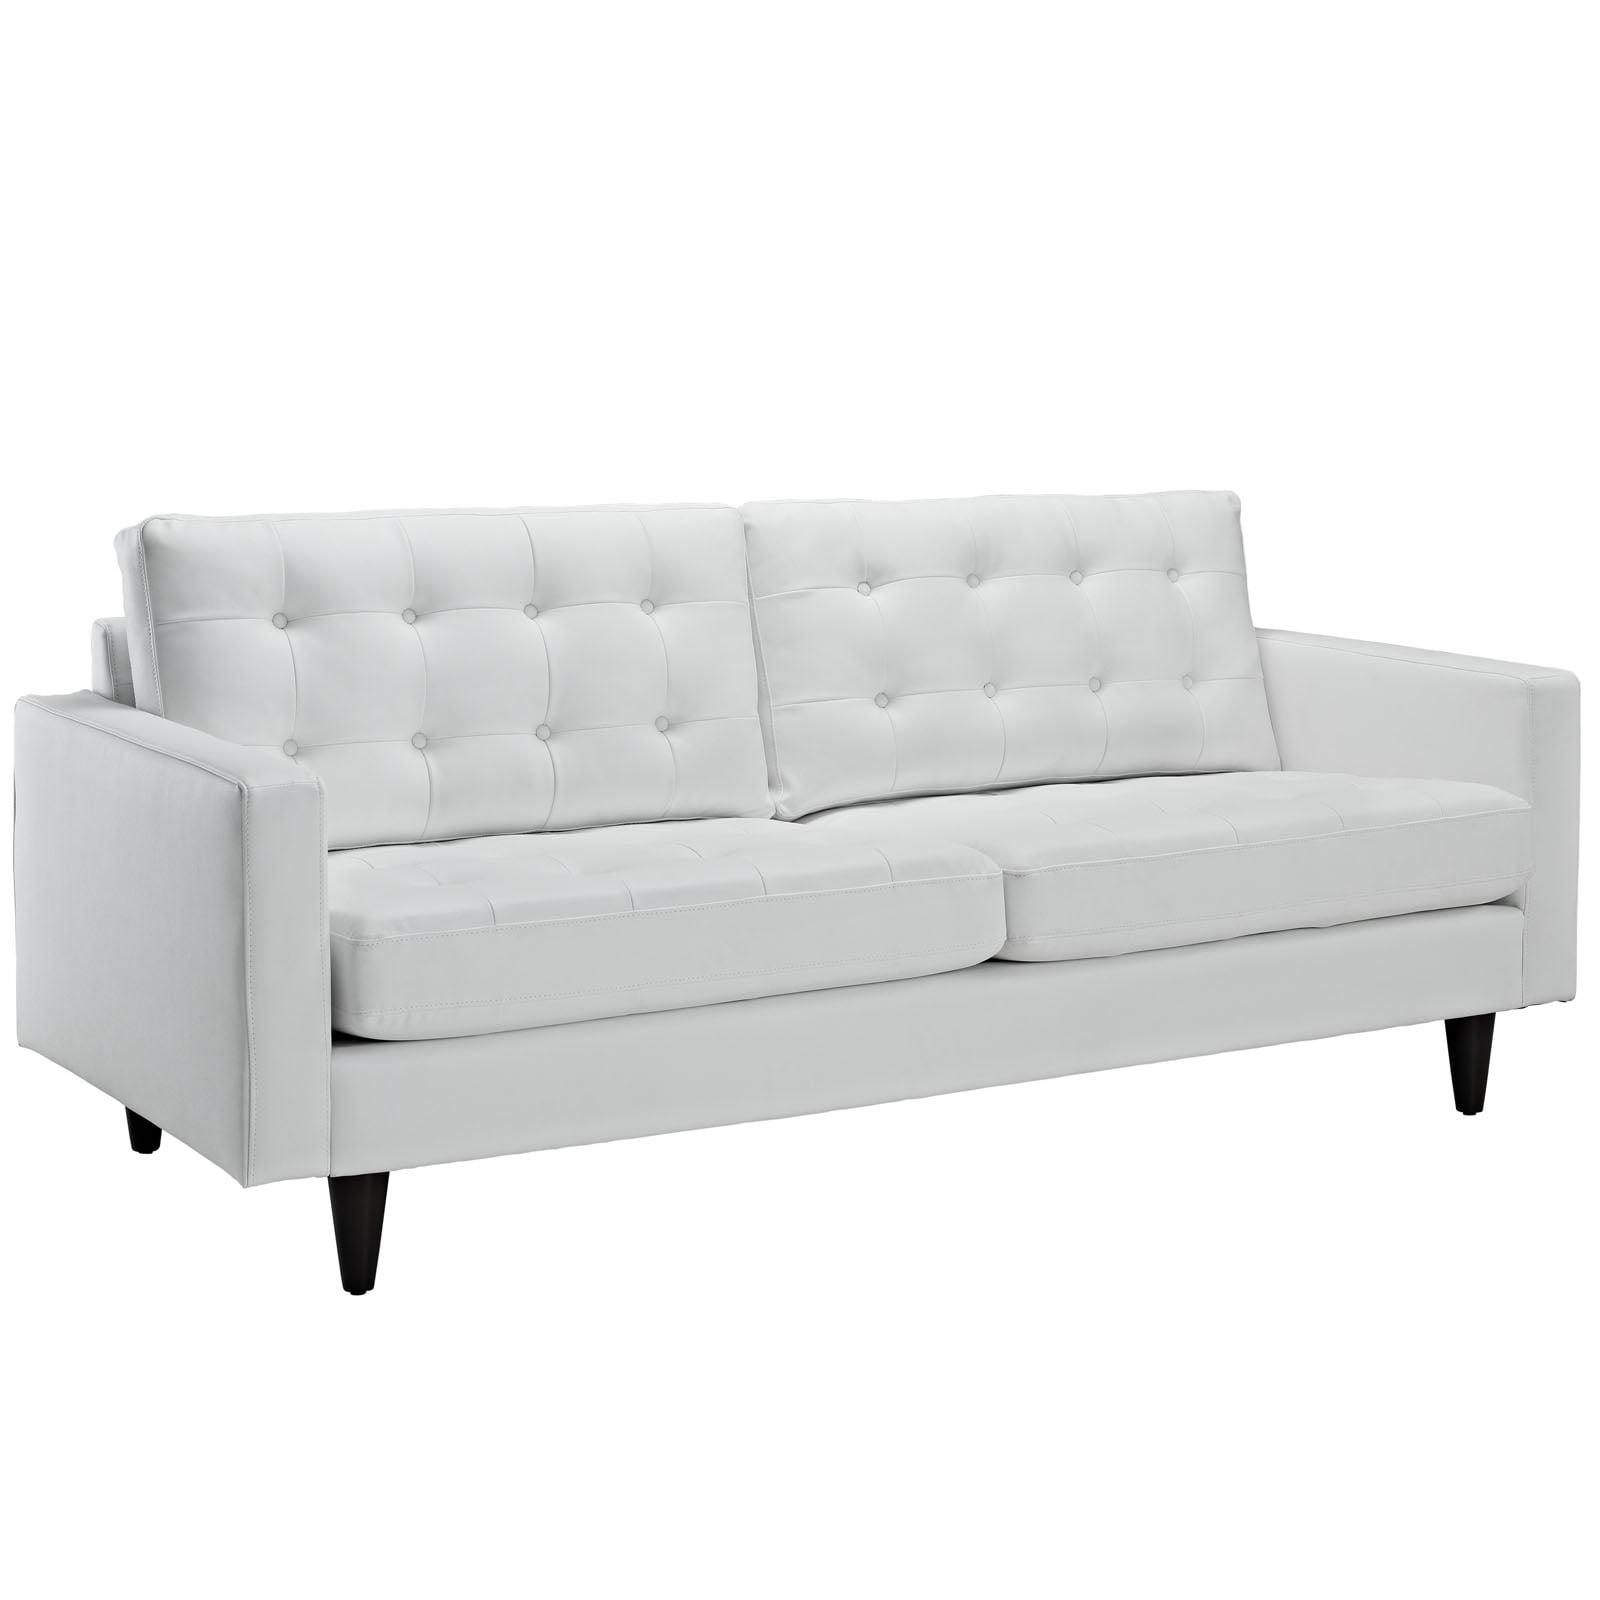 Modern Contemporary Living Room Leather, Modern White Leather Couches